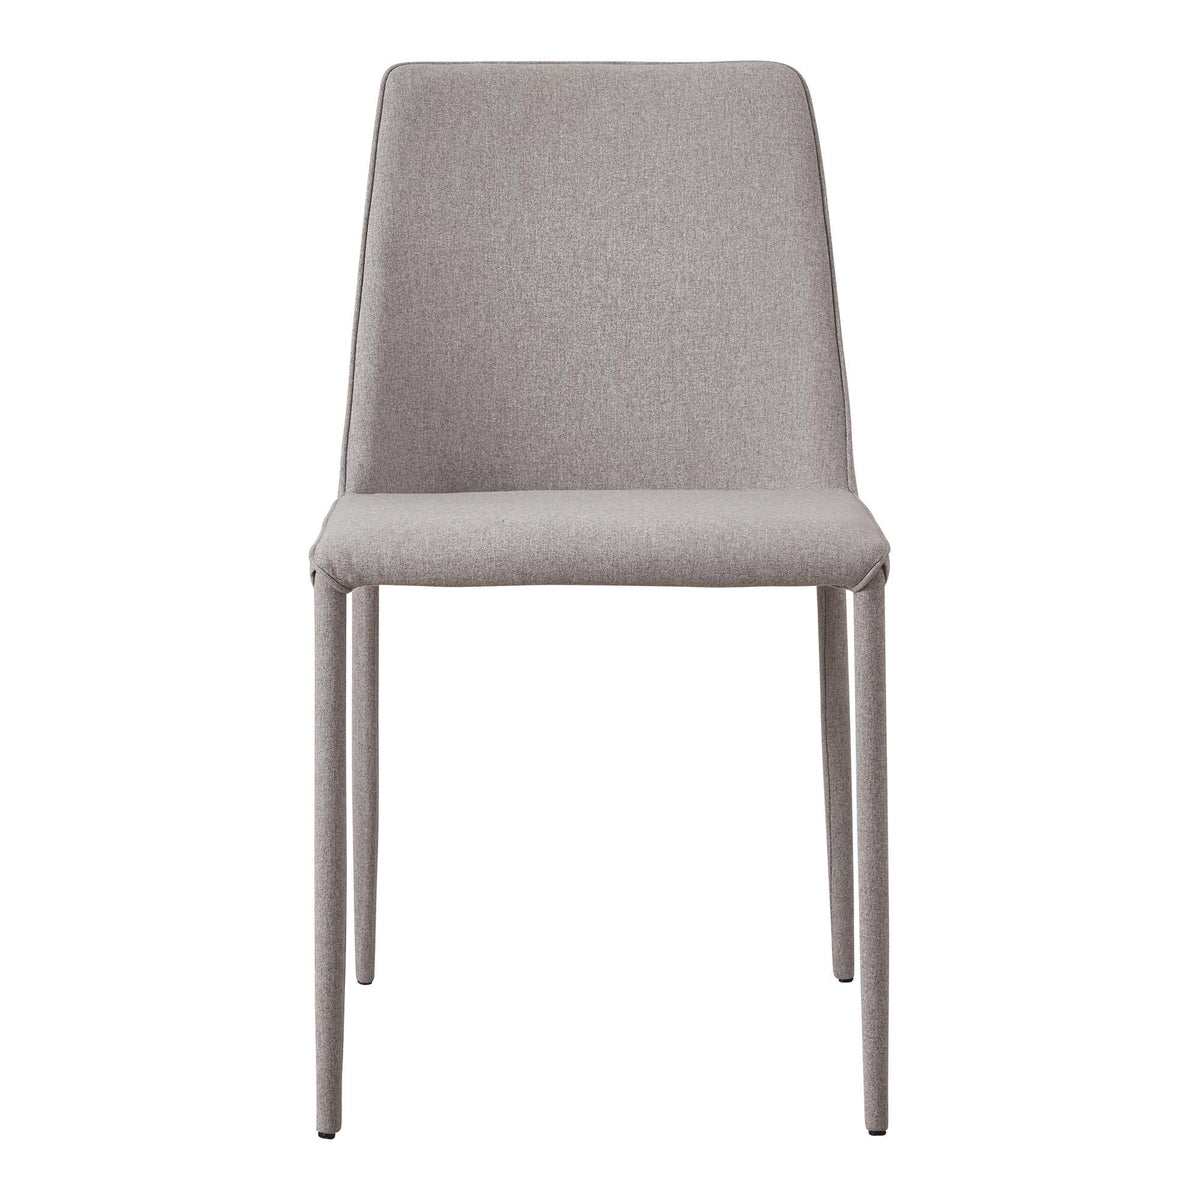 Moe's Home Collection Nora Fabric Dining Chair Light Grey-M2 - YM-1003-15